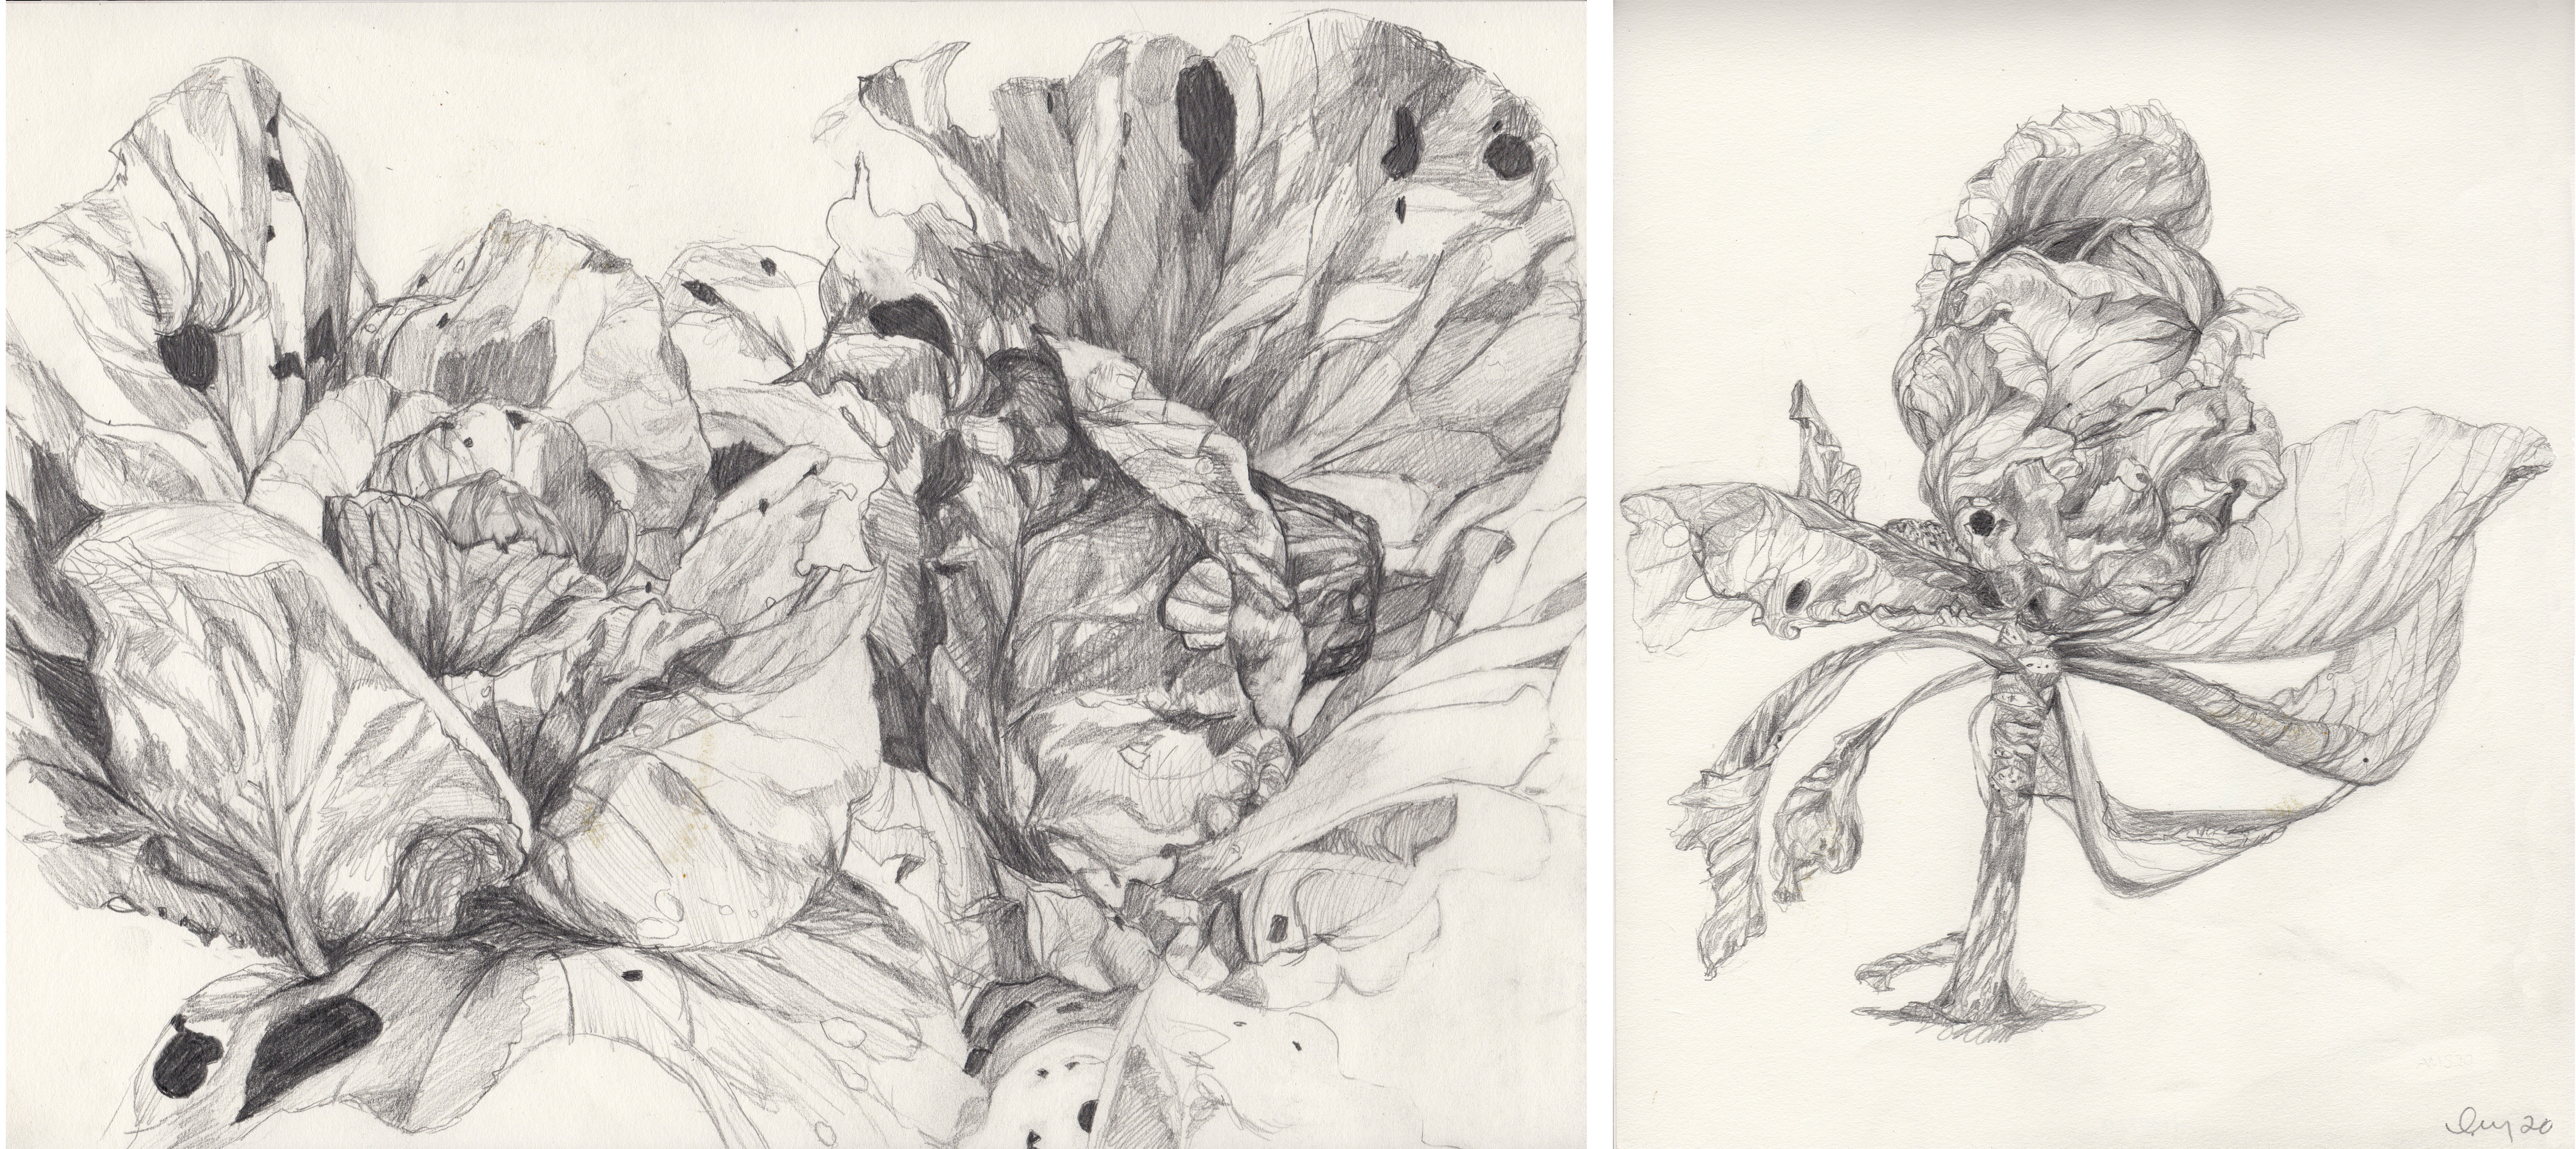 Exhibition header image featuring two paper drawings of botanical studies in graphite by Amy Sobin: "Two Cabbages with Holes", 2020; "Purple Cabbage", 2020.